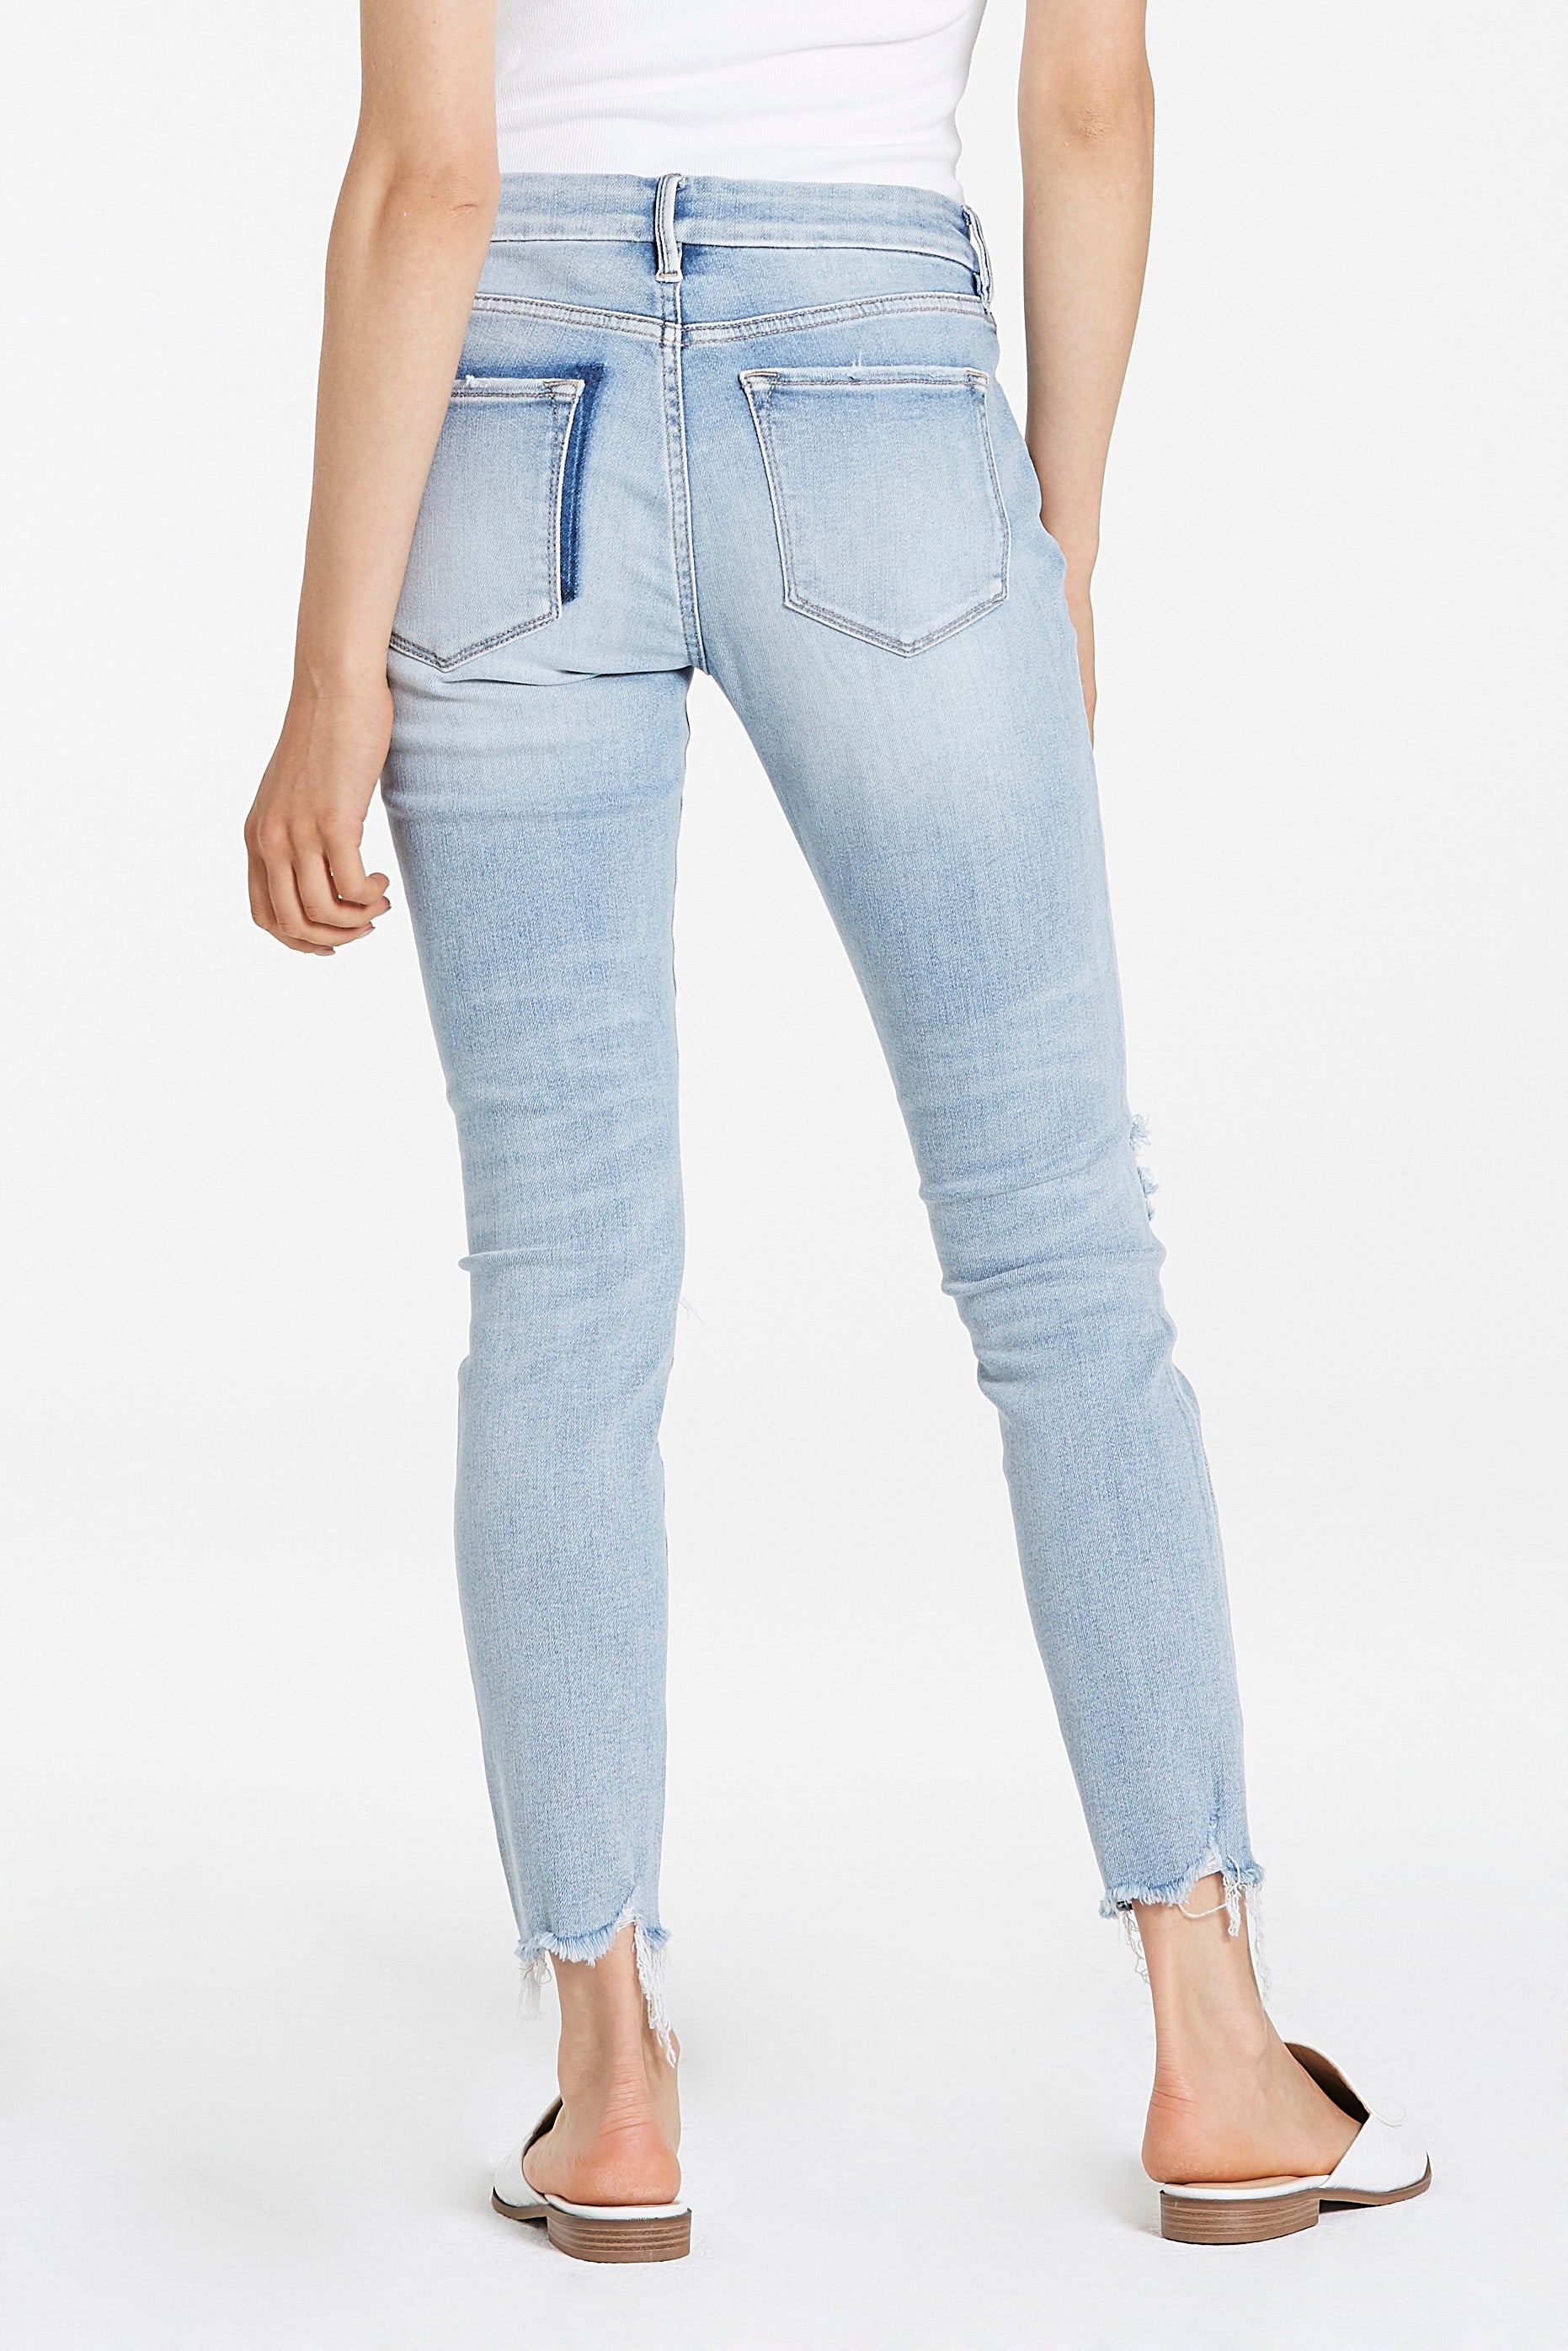 Buy Jordache Essential High Rise Super Skinny Blue Jeans (10, Rinse) at